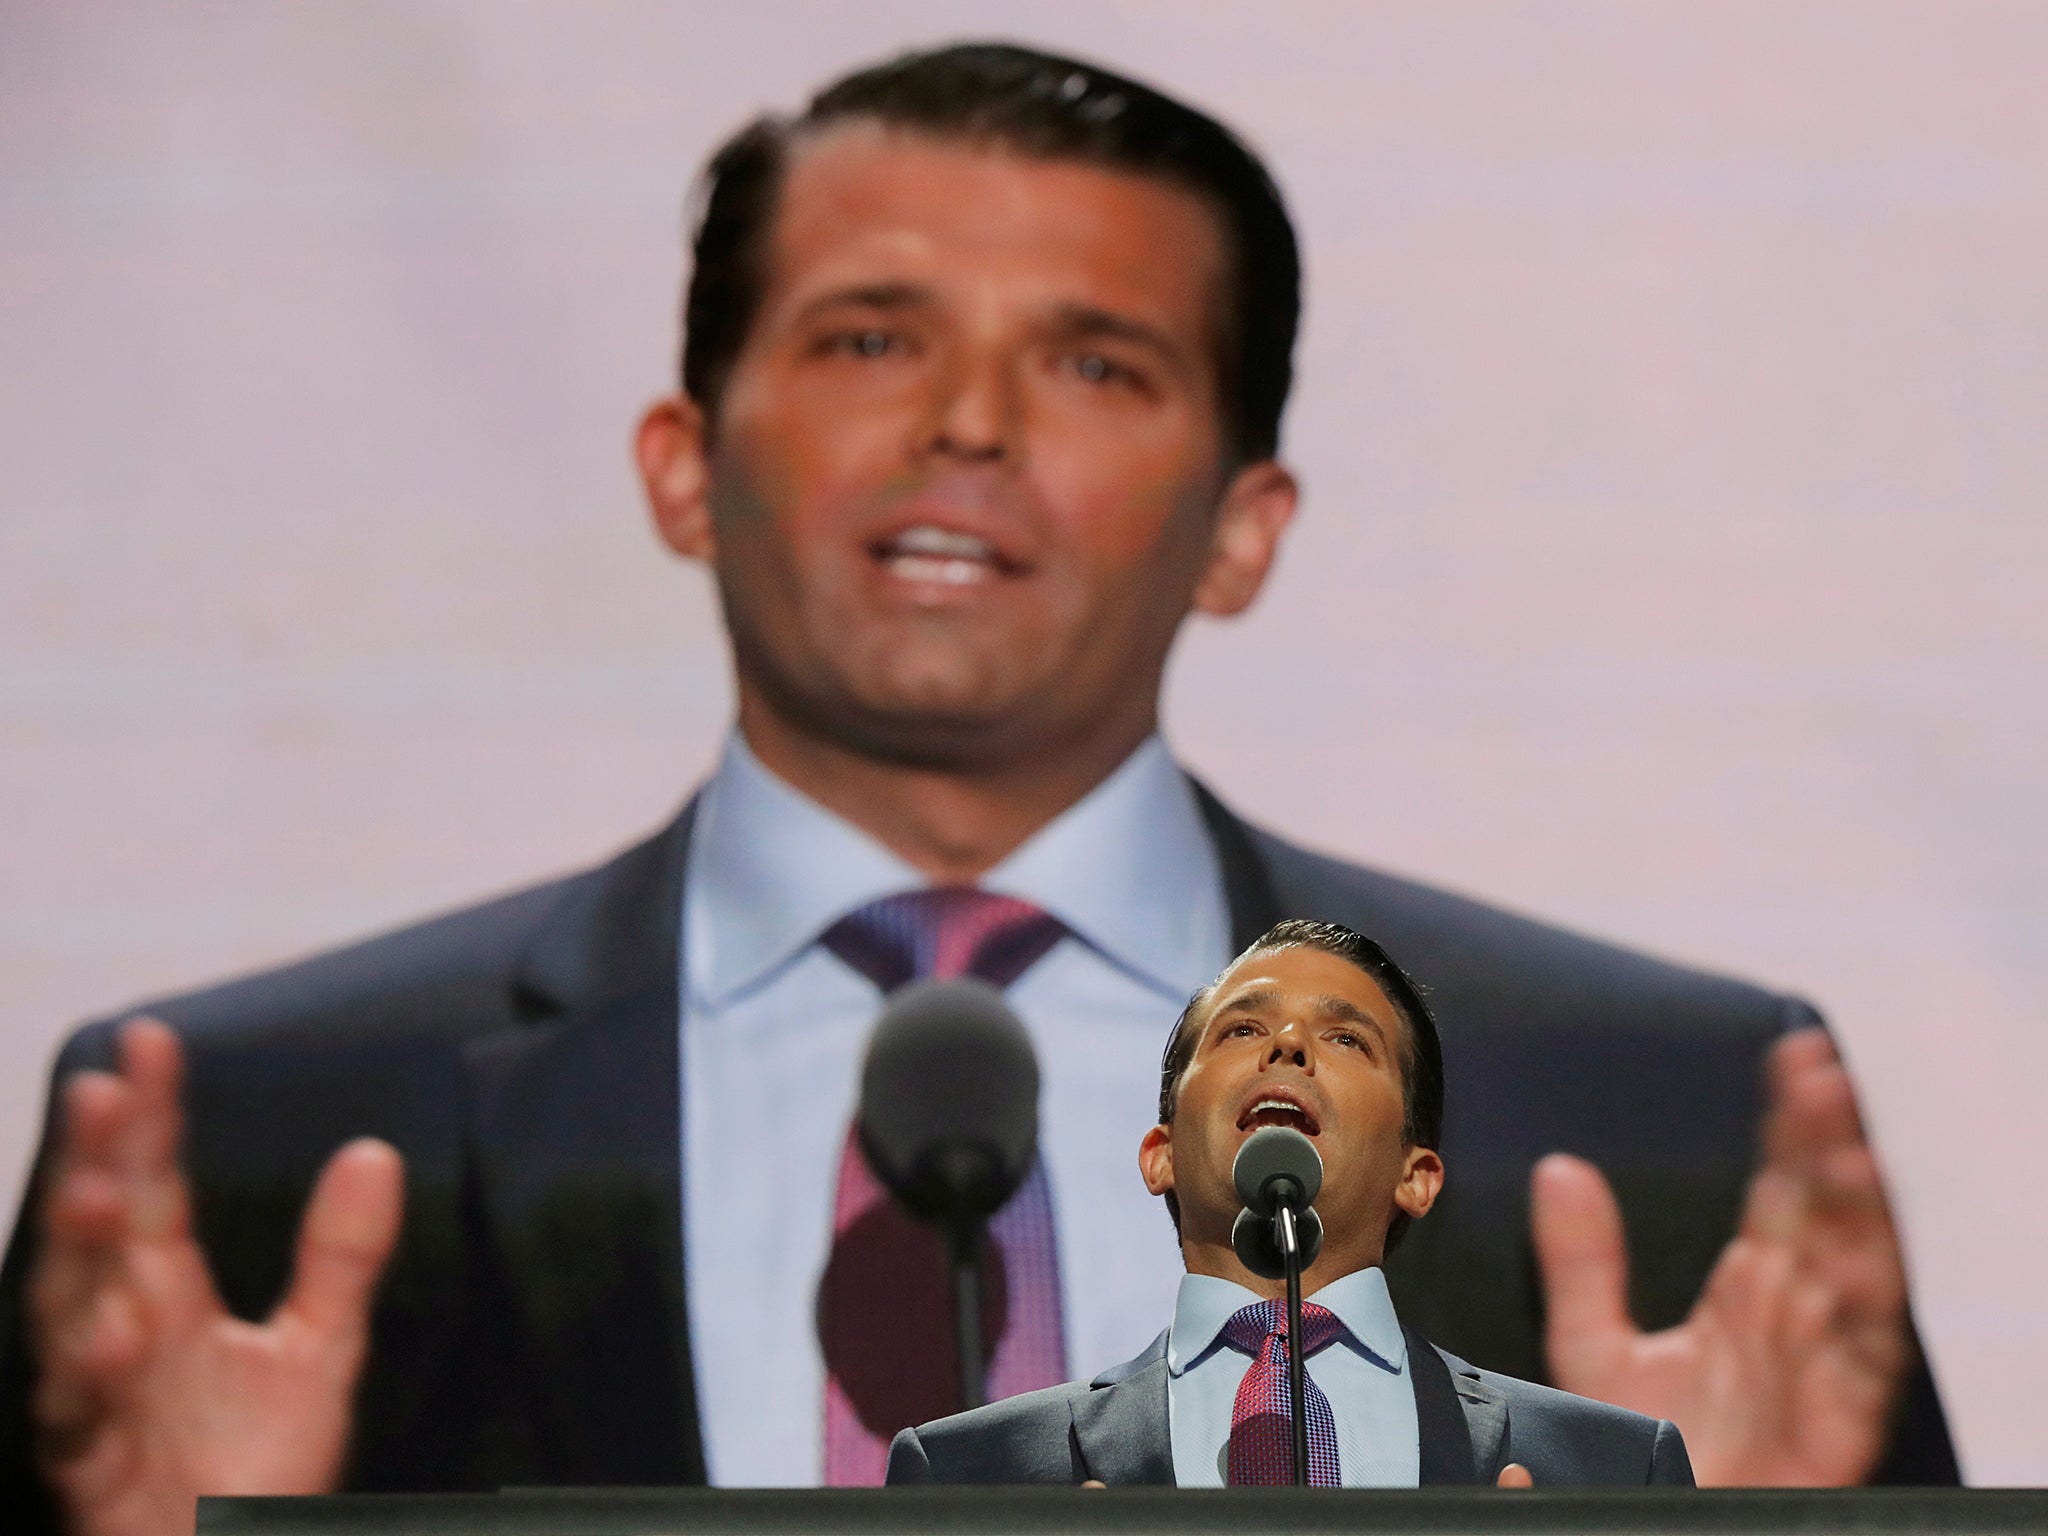 Donald Trump Jr. speaks at the 2016 Republican National Convention